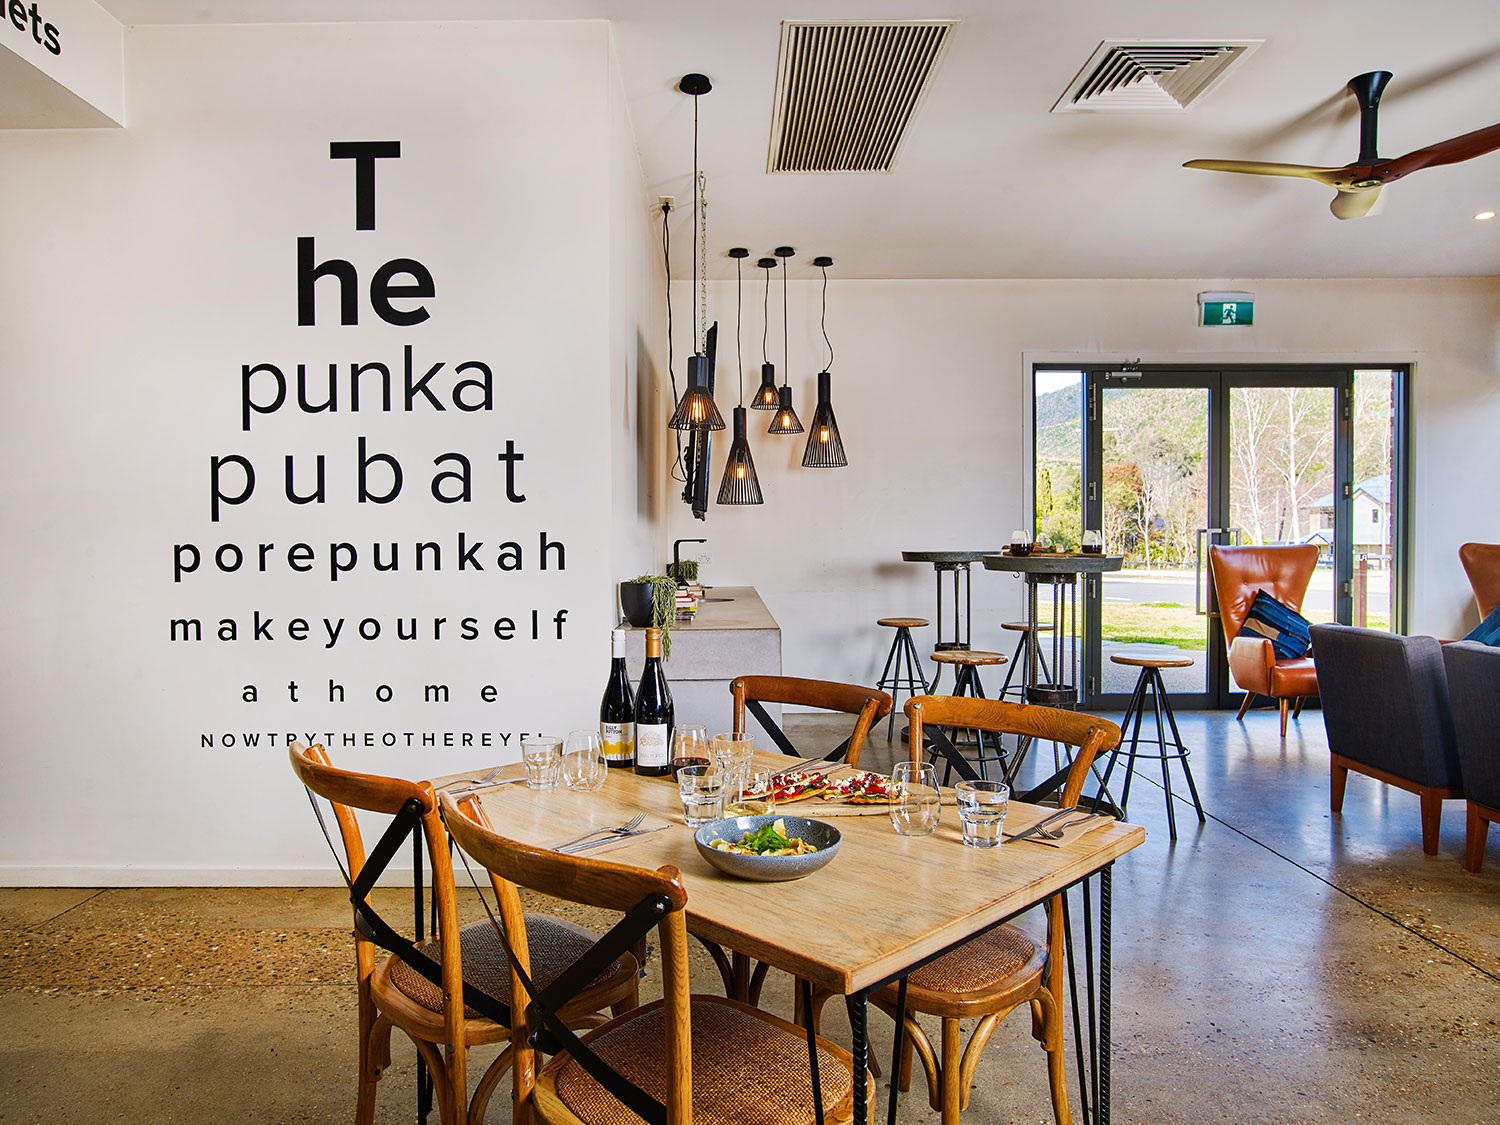 The Punka Pub offers a range of lighter bites and more hearty classic pub meals